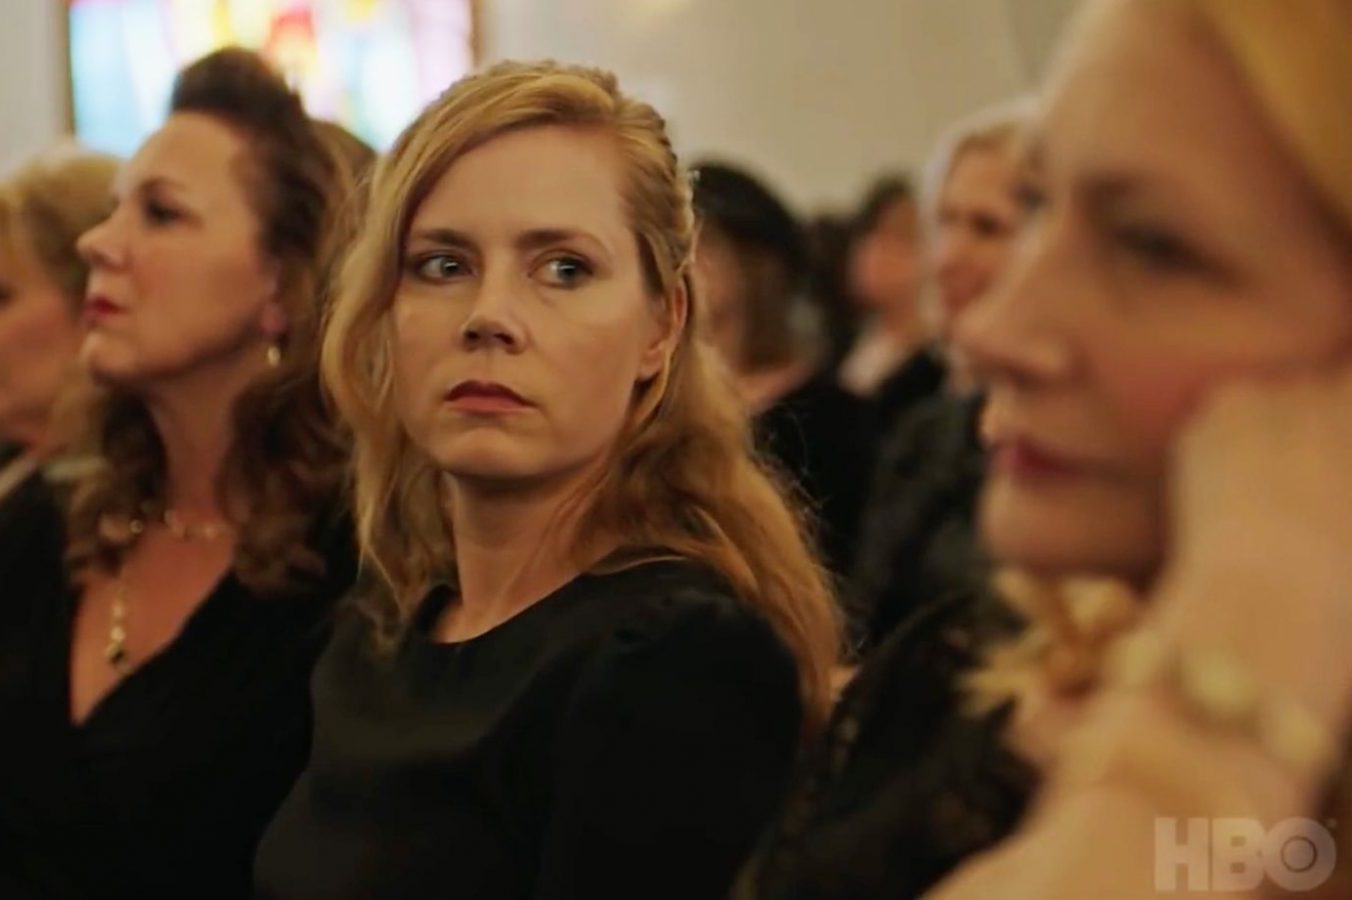 in an article about psychological thriller series, a screenshot from Sharp Objects